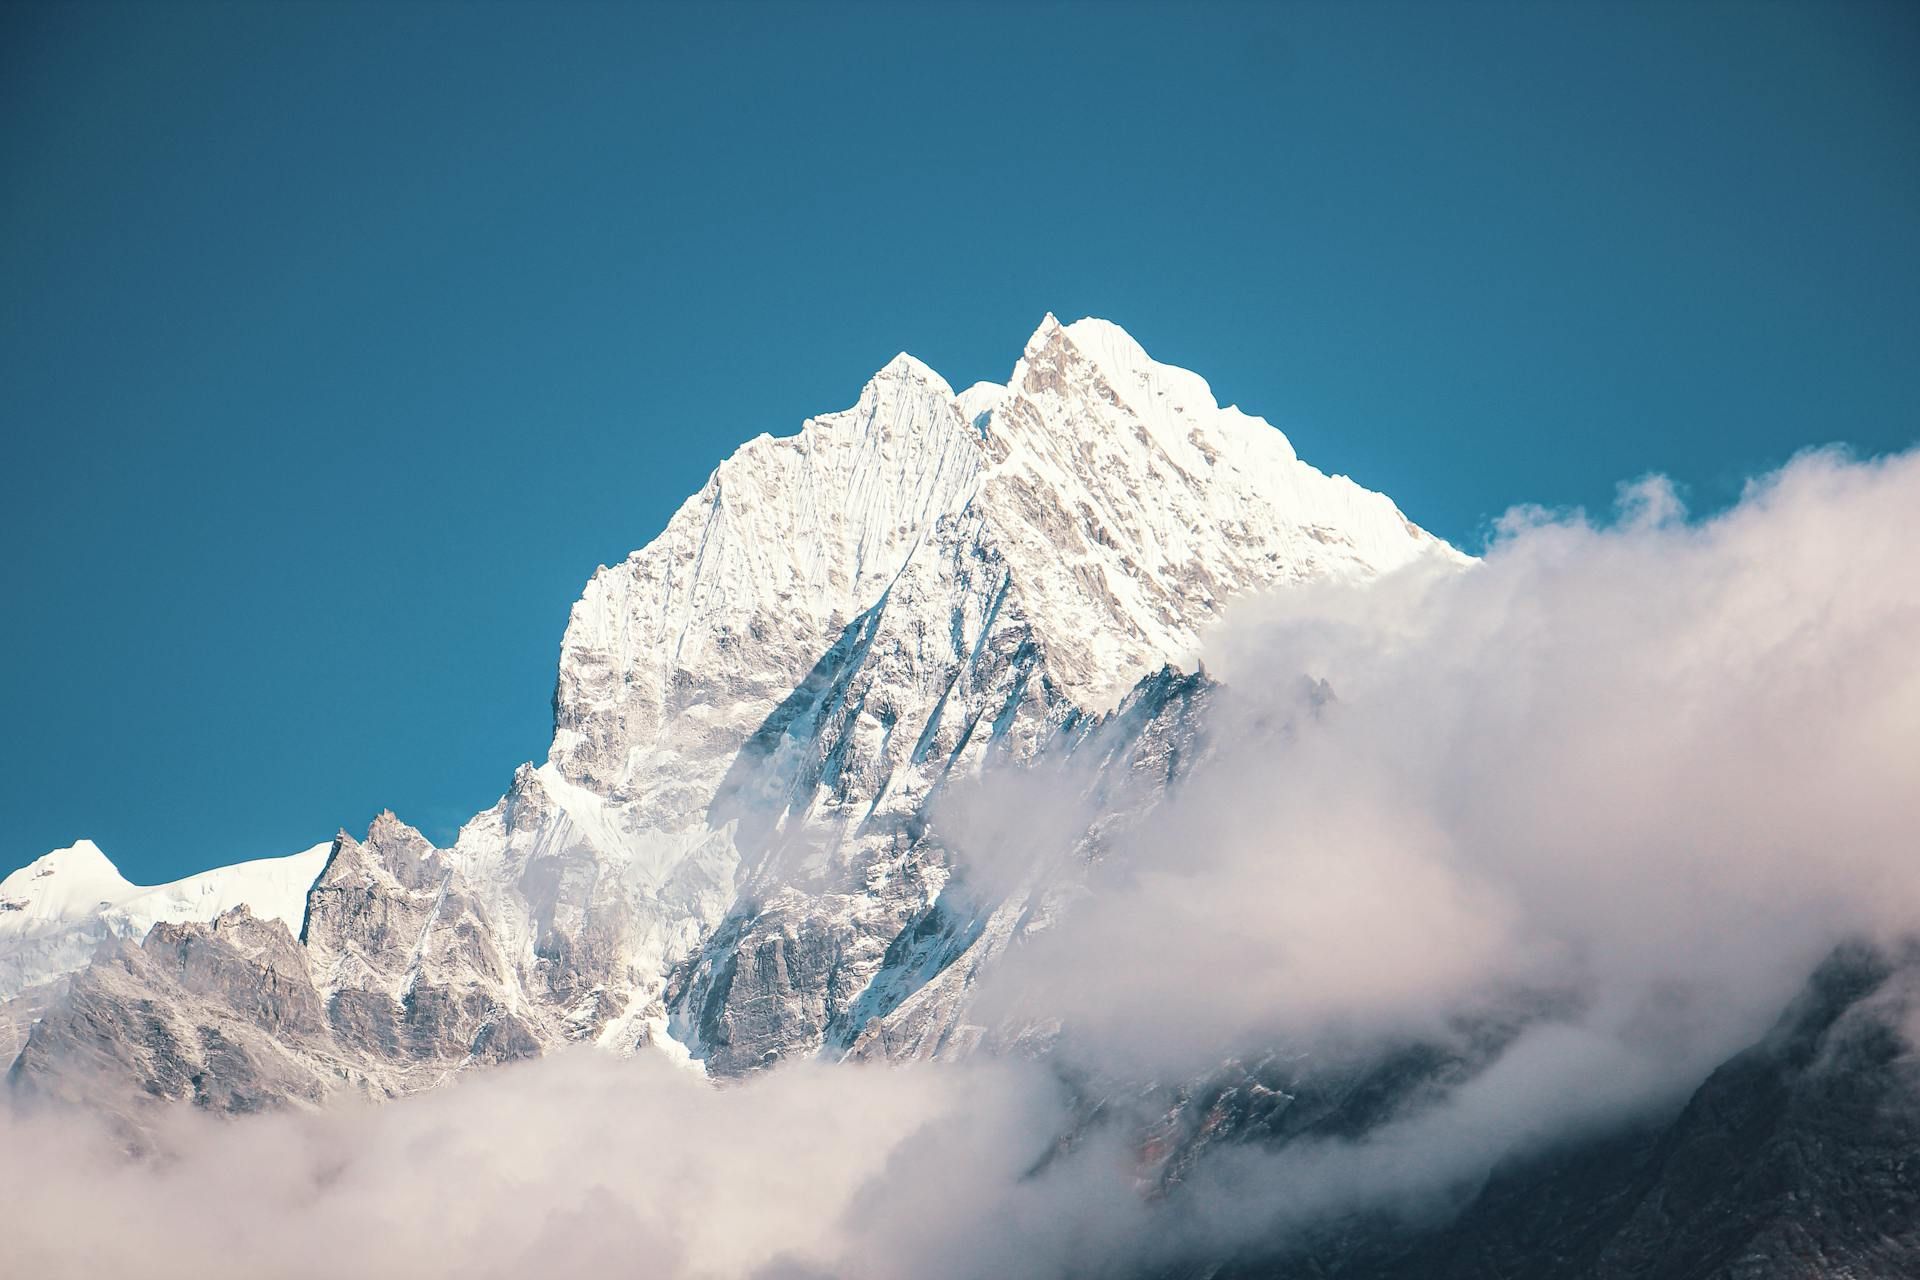 Mount Everest covered in clouds against a blue sky